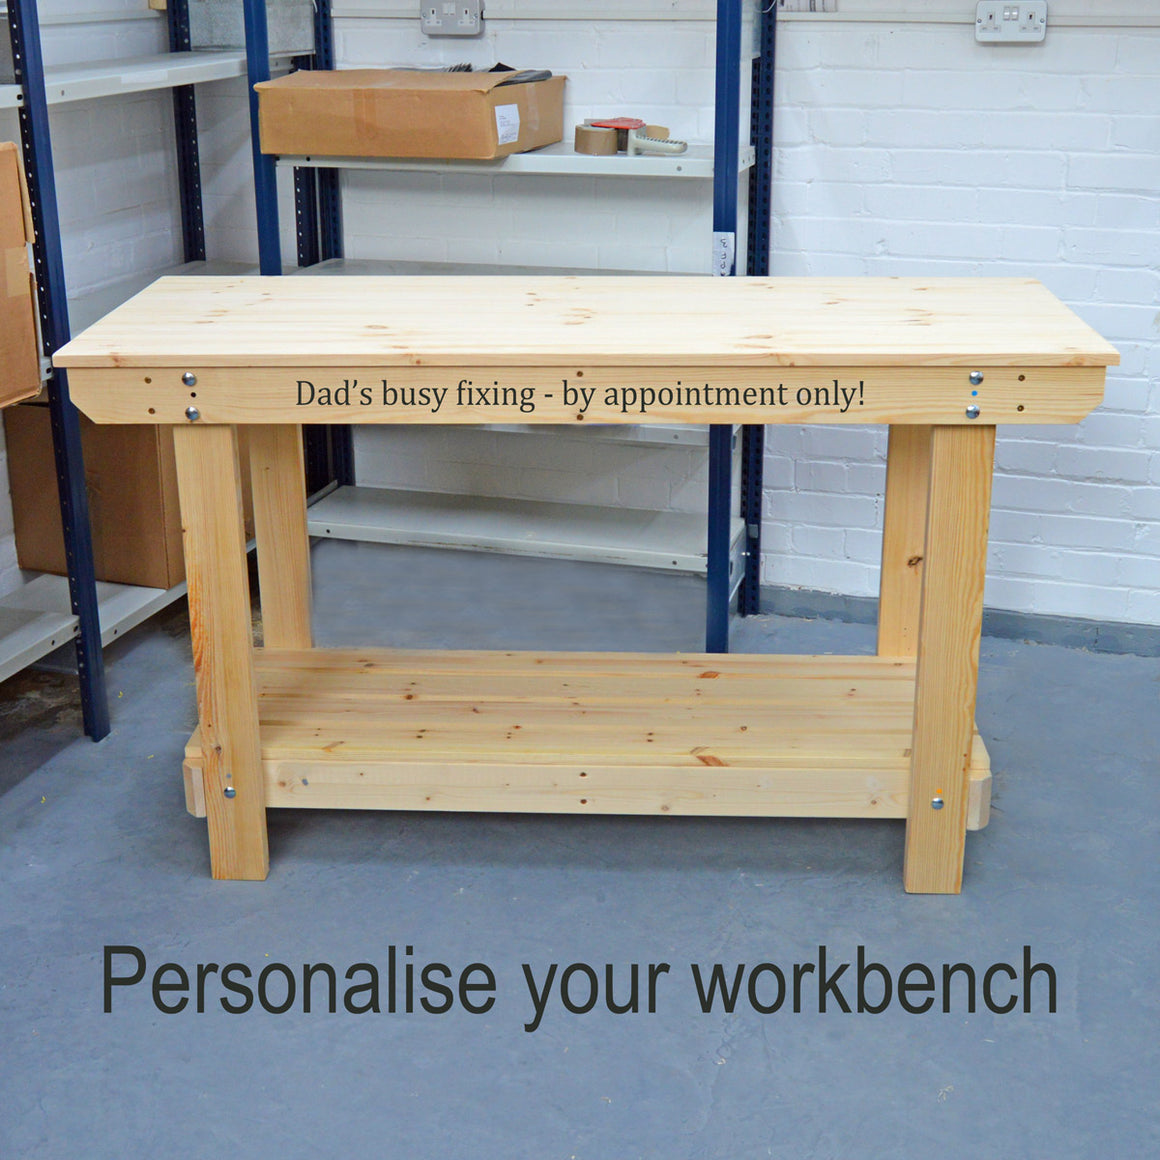 add text to your workbench